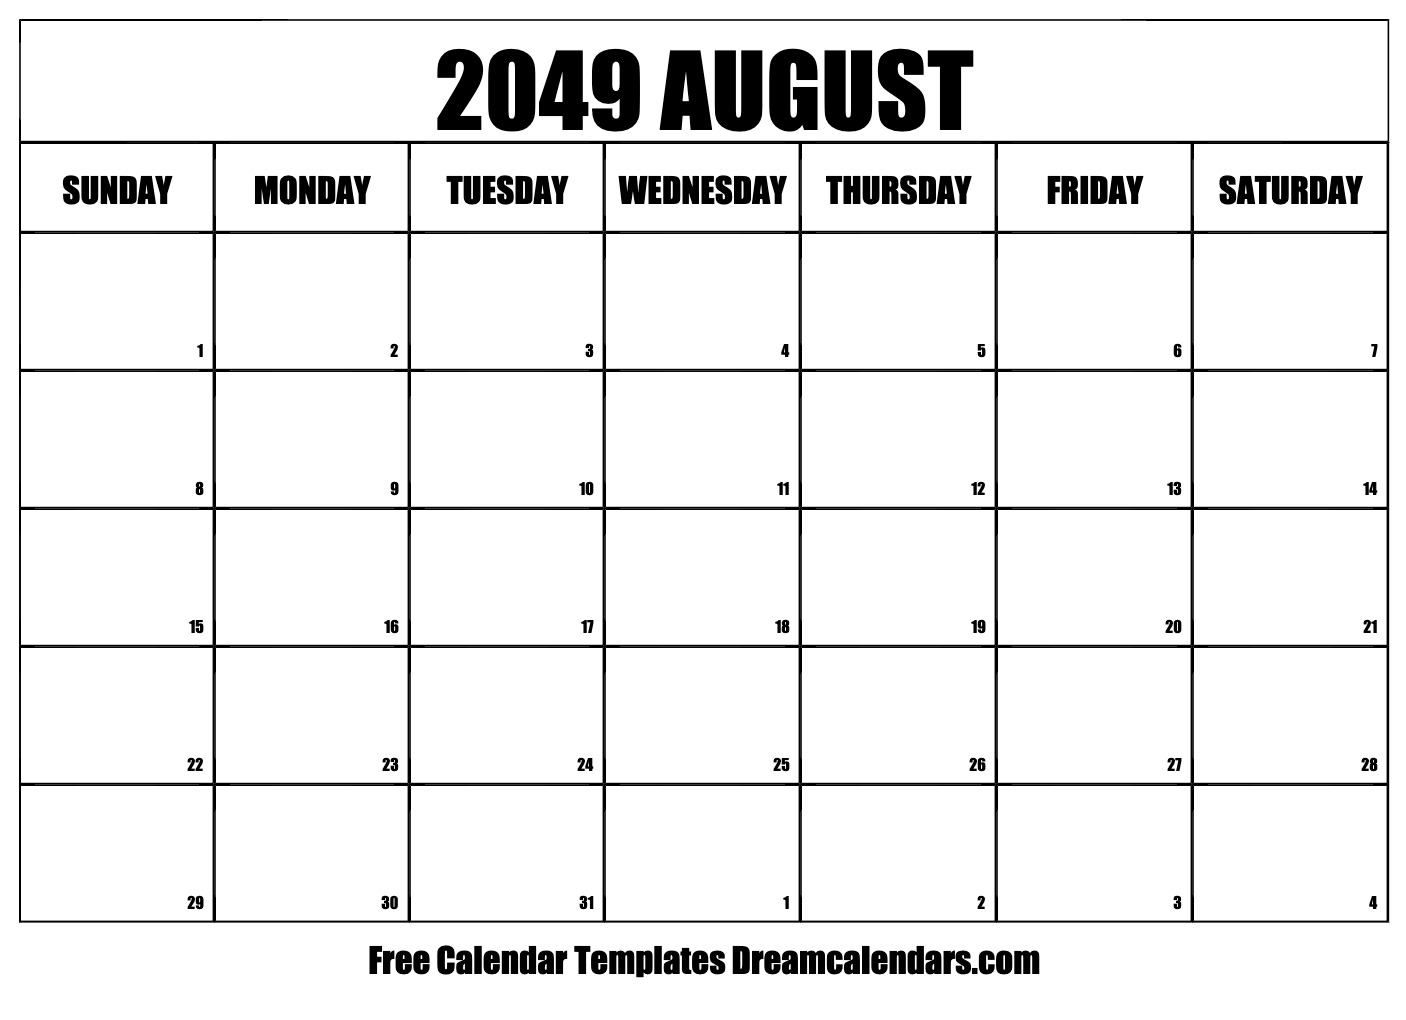 august-2049-calendar-free-blank-printable-with-holidays